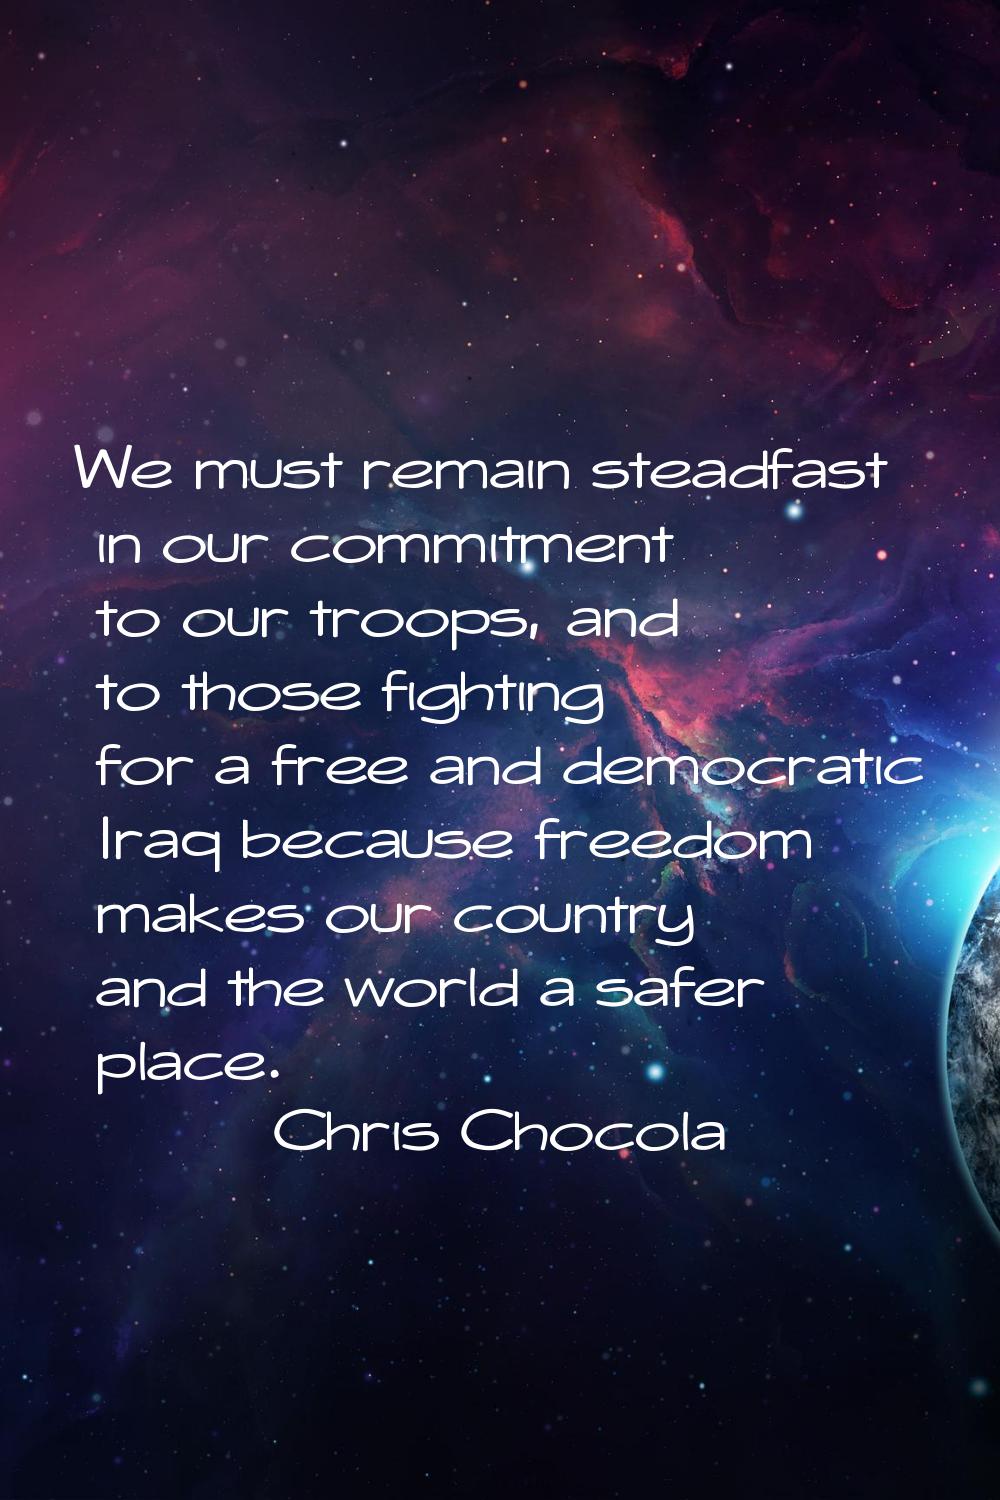 We must remain steadfast in our commitment to our troops, and to those fighting for a free and demo